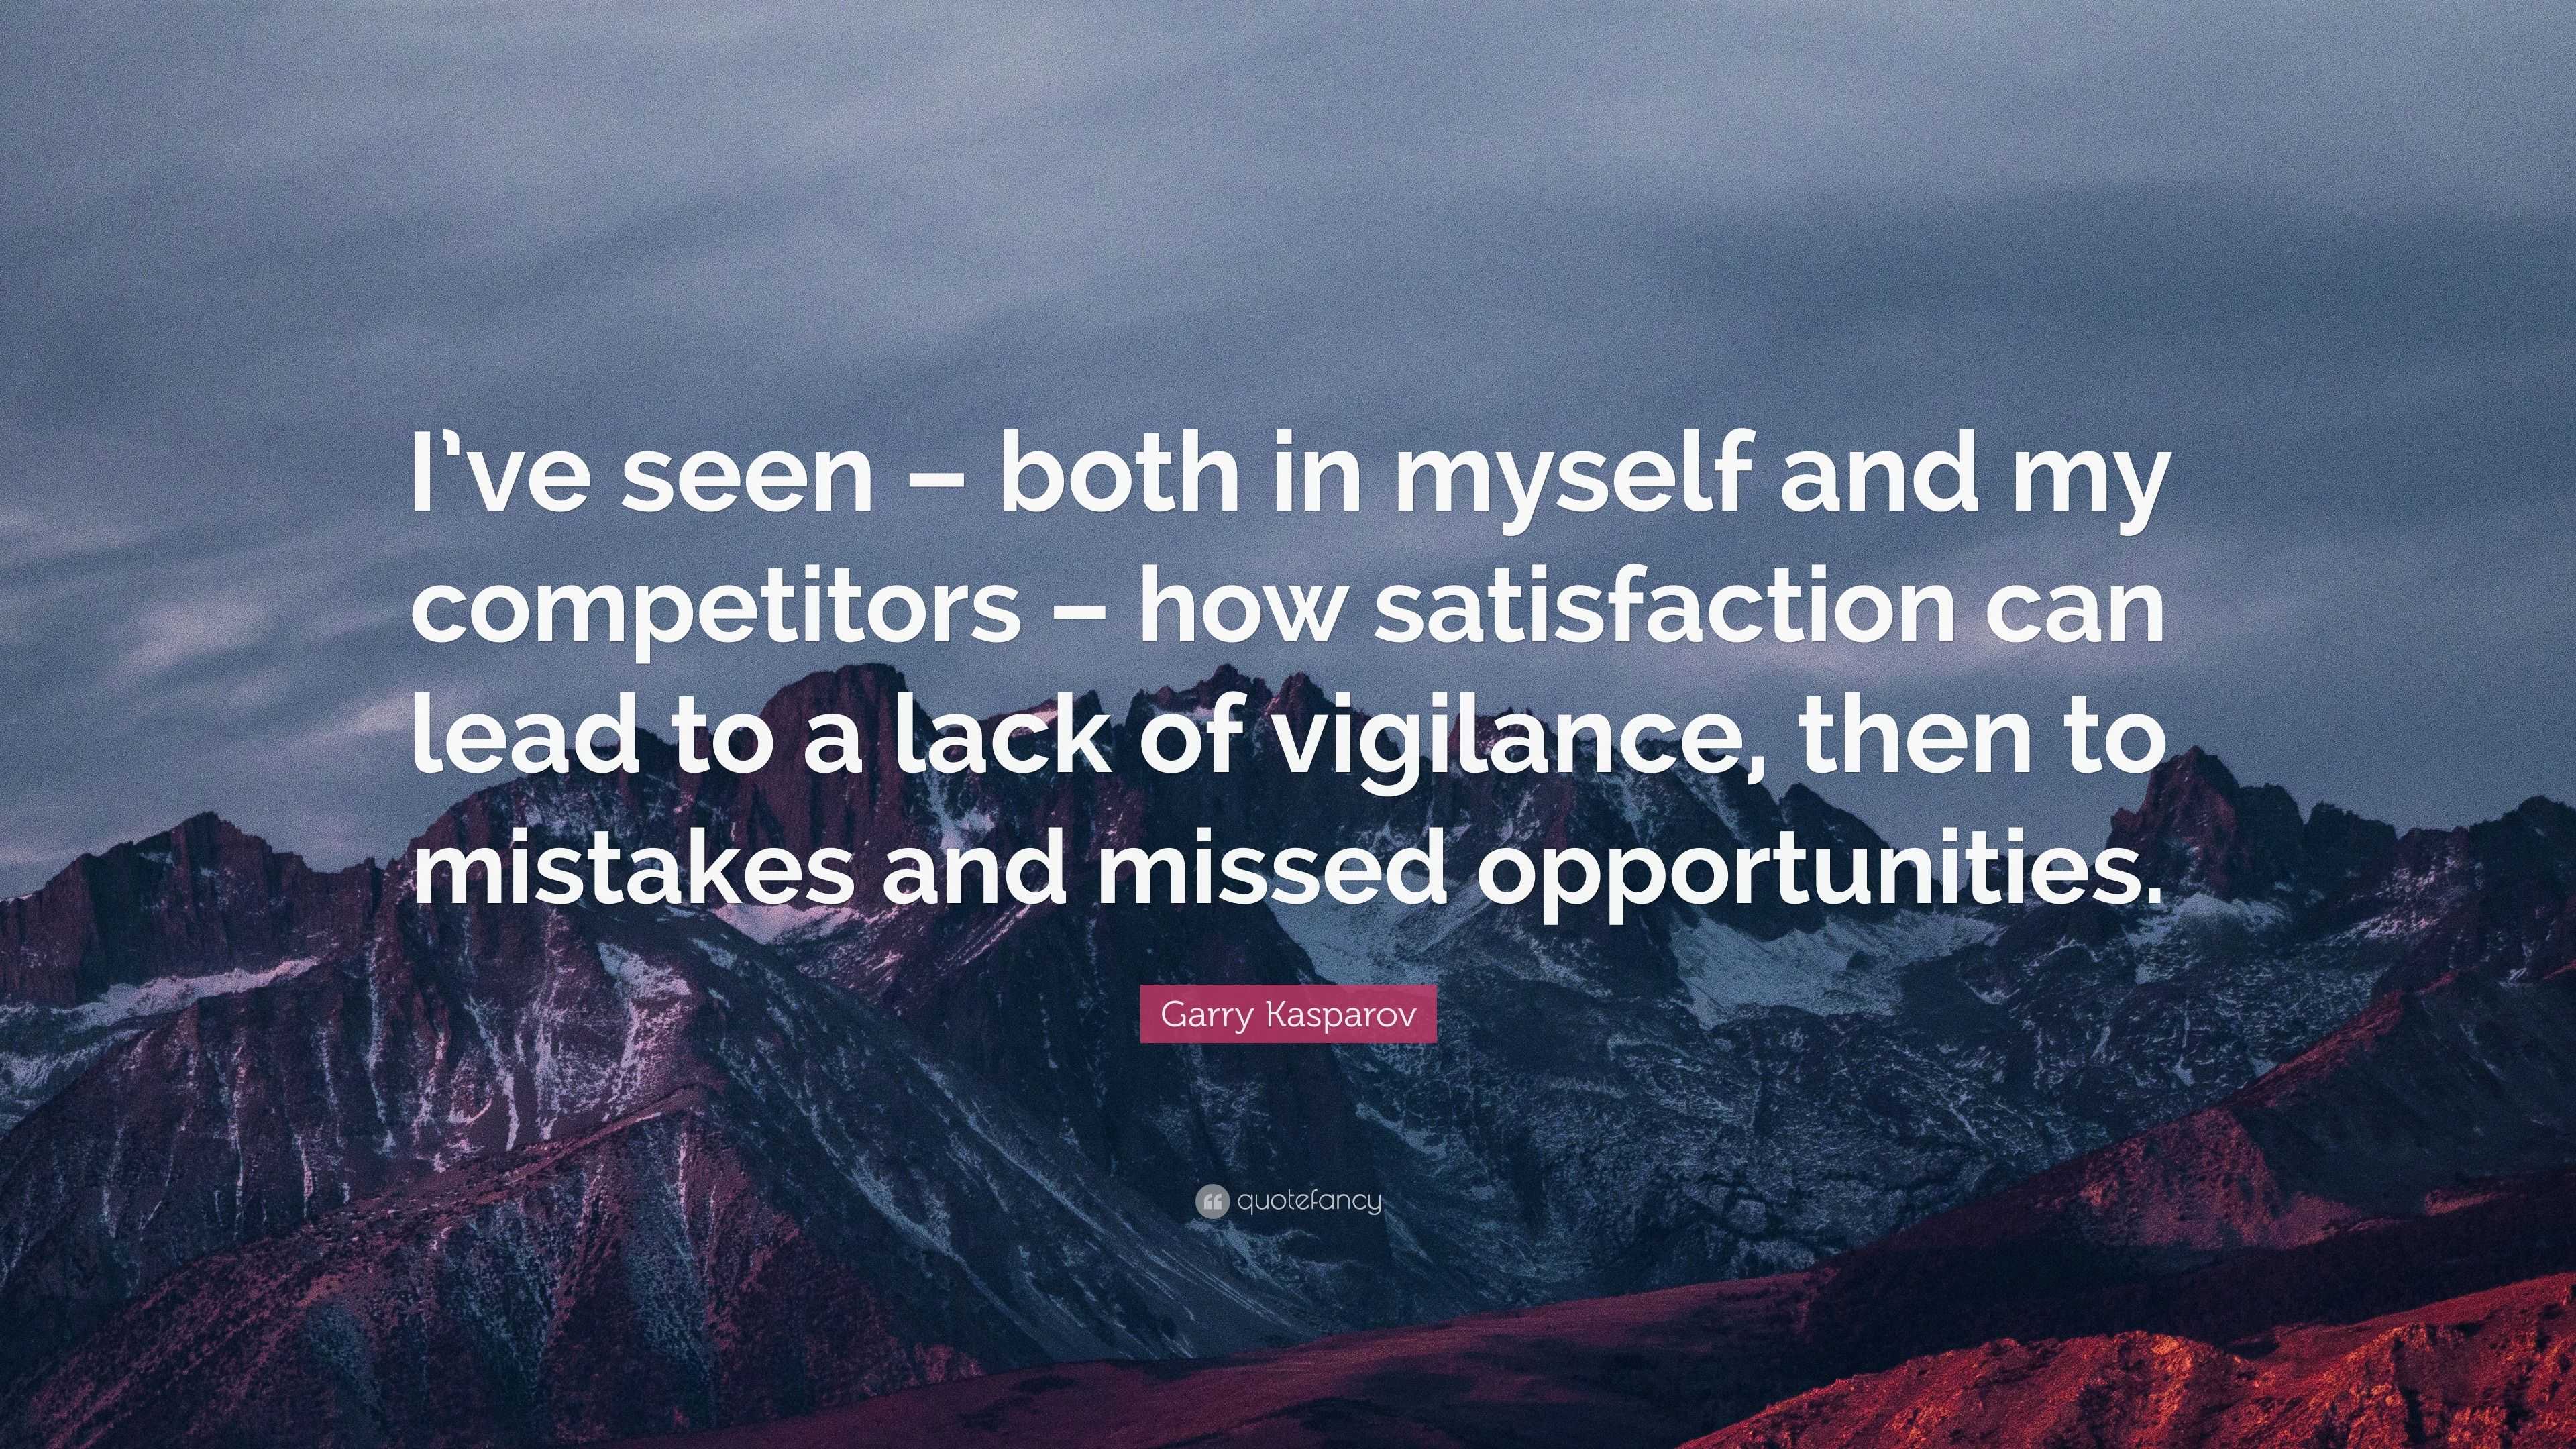 Garry Kasparov Quote “I ve seen – both in myself and my petitors